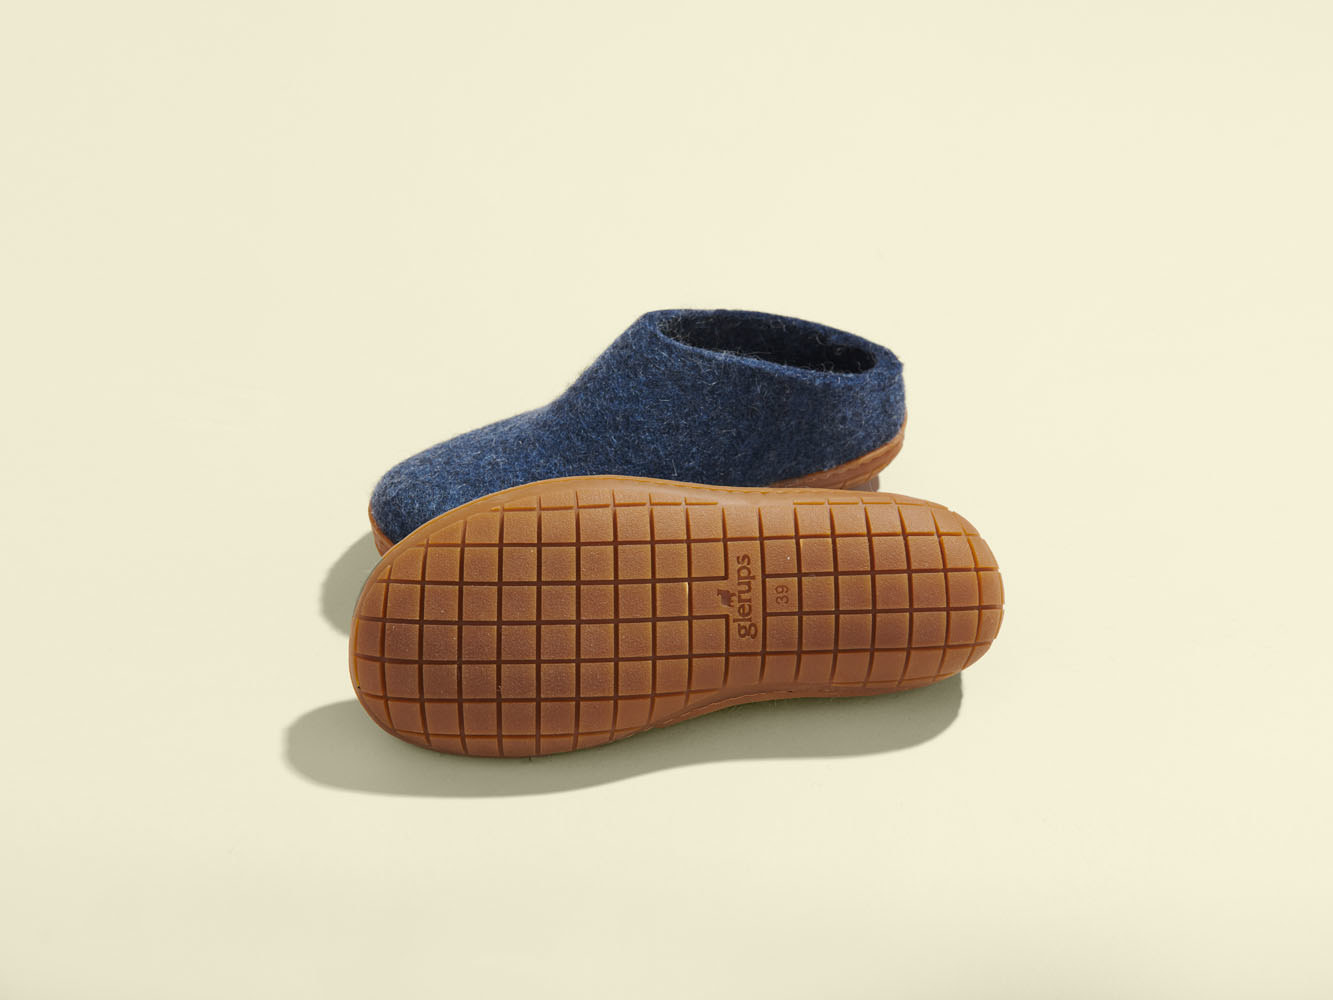 The Best Slippers For Any Budget